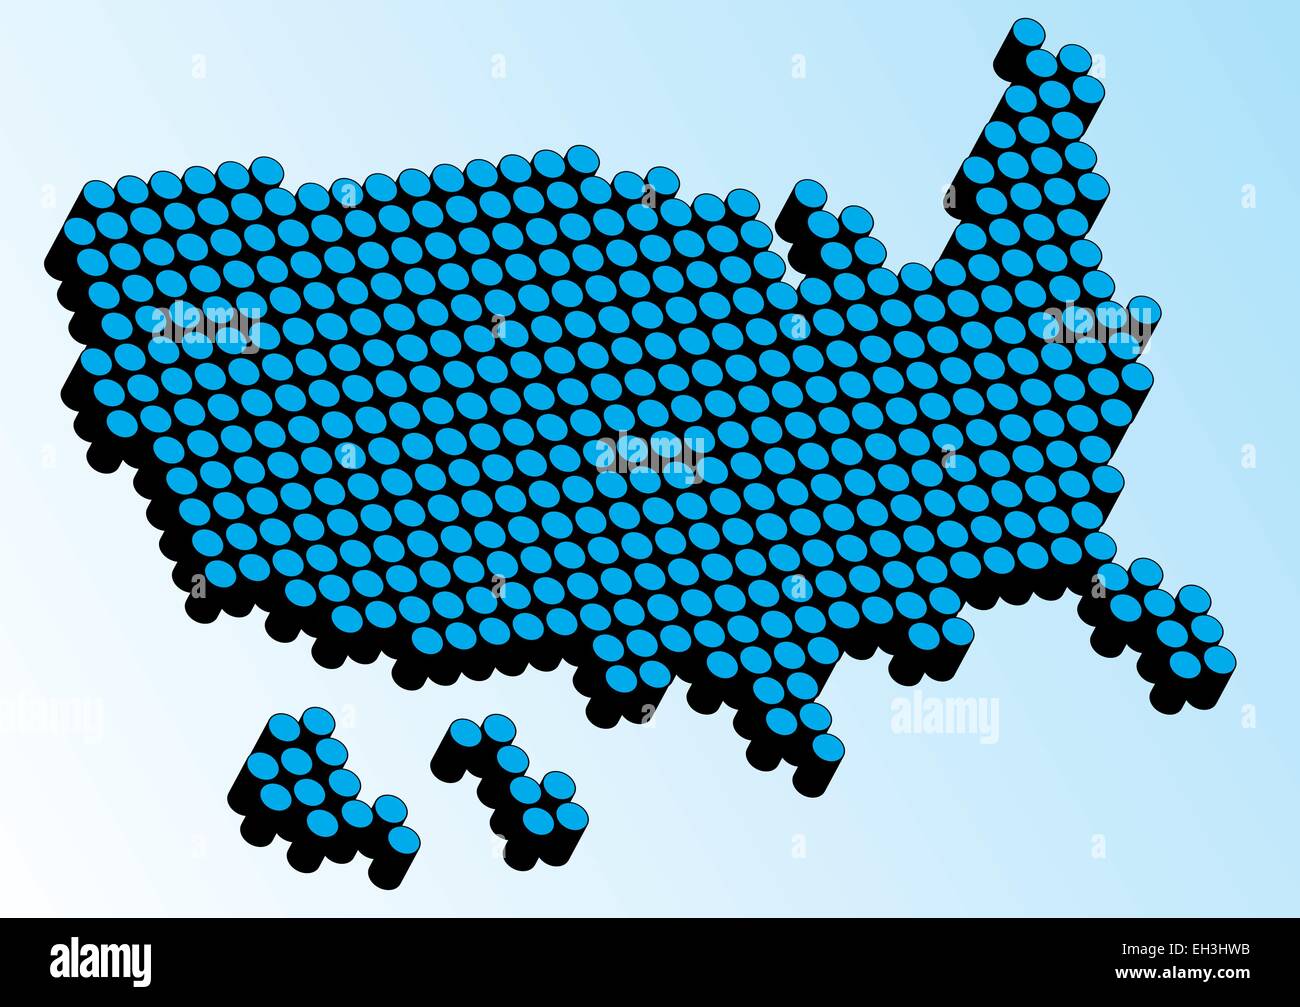 Abstract USA map made from black dots on a blue background. Stock Vector